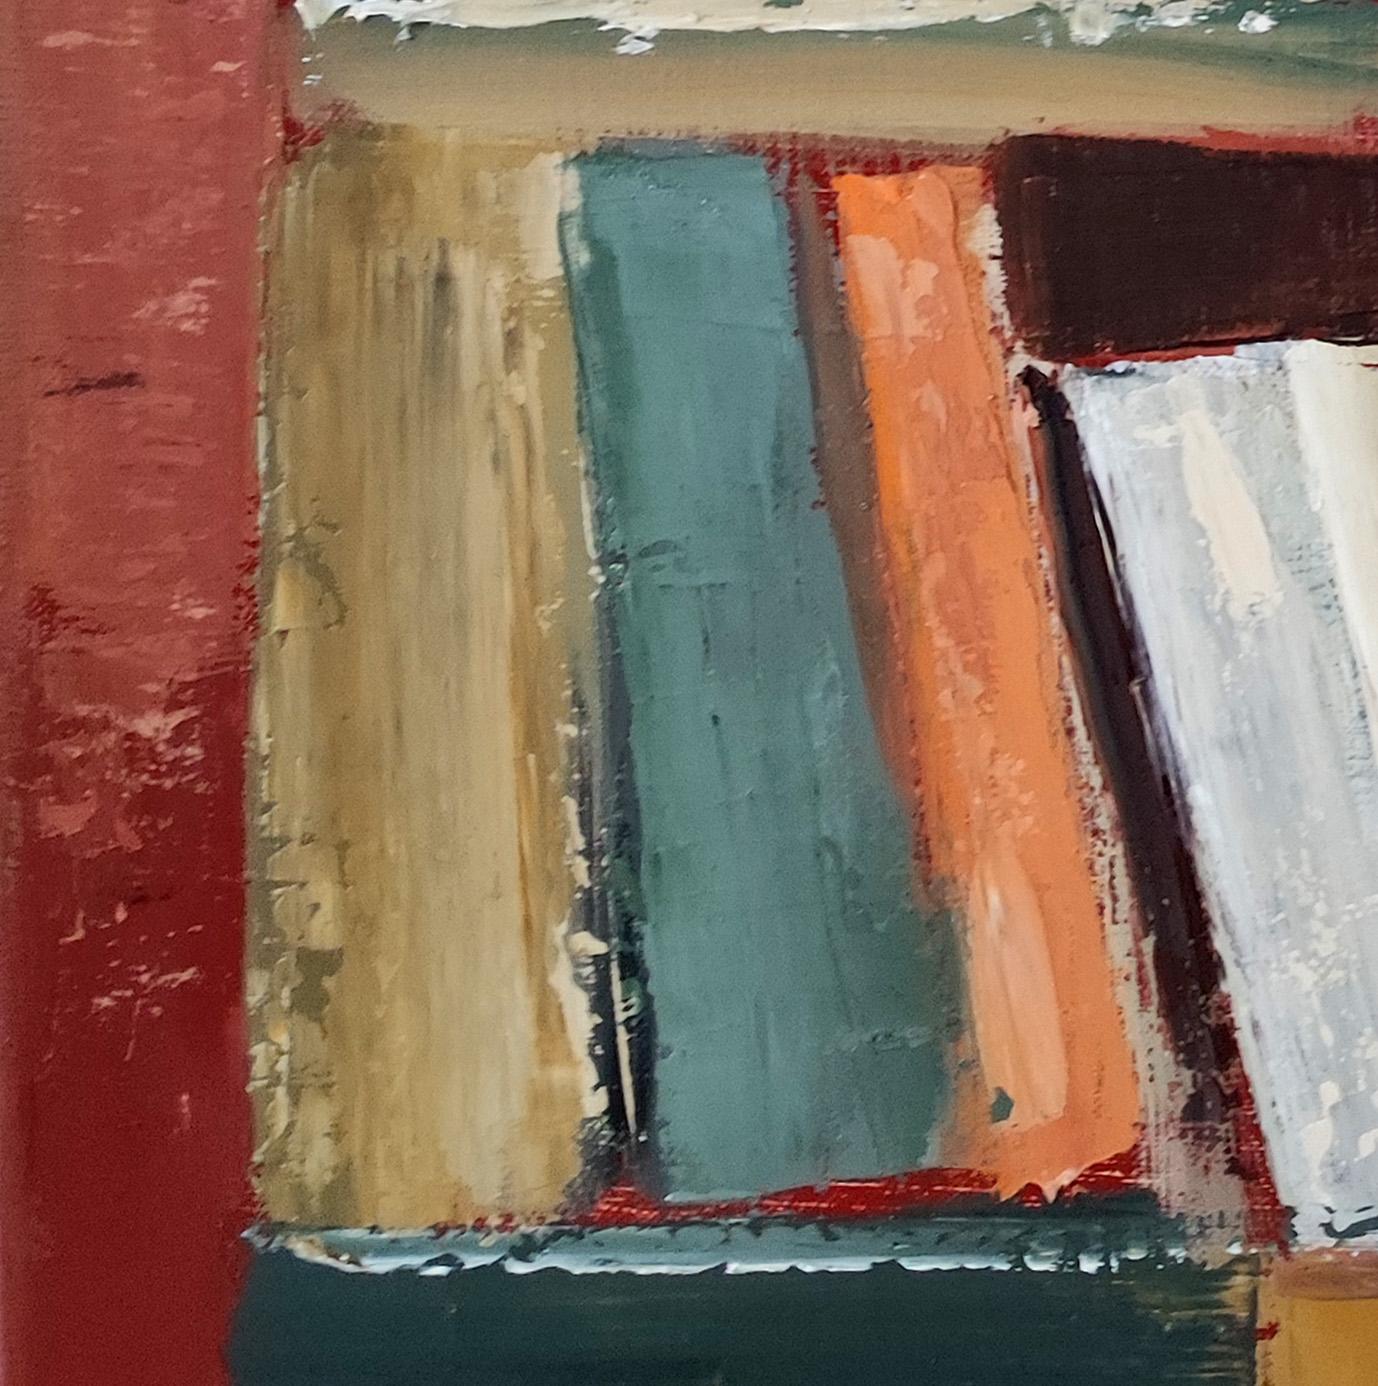 chromatic, colored abstract, books, oil on canvas, expressionism, geometric  1